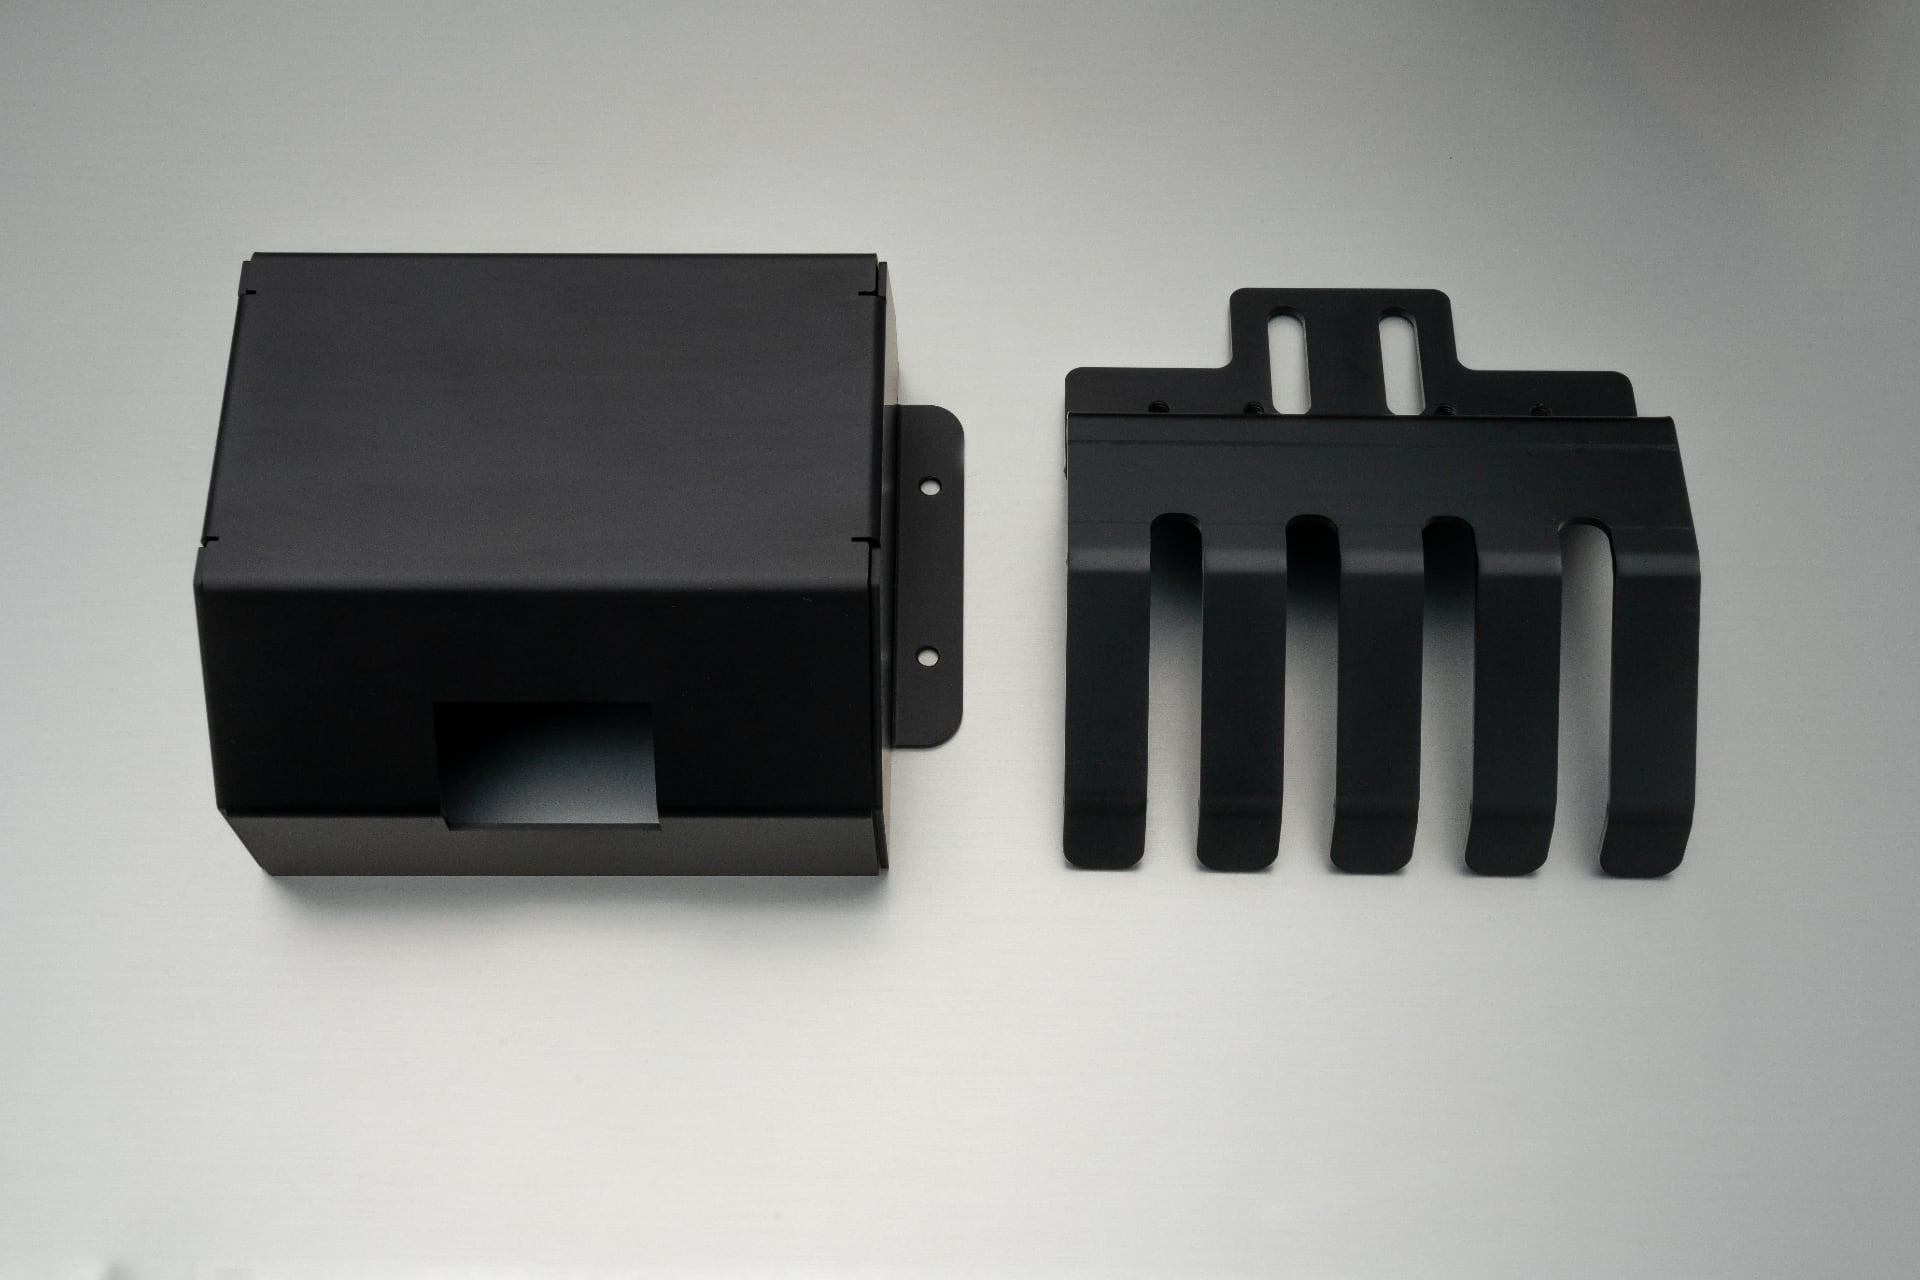 Example of various powder-coated sheet metal parts manufactured with meviy.